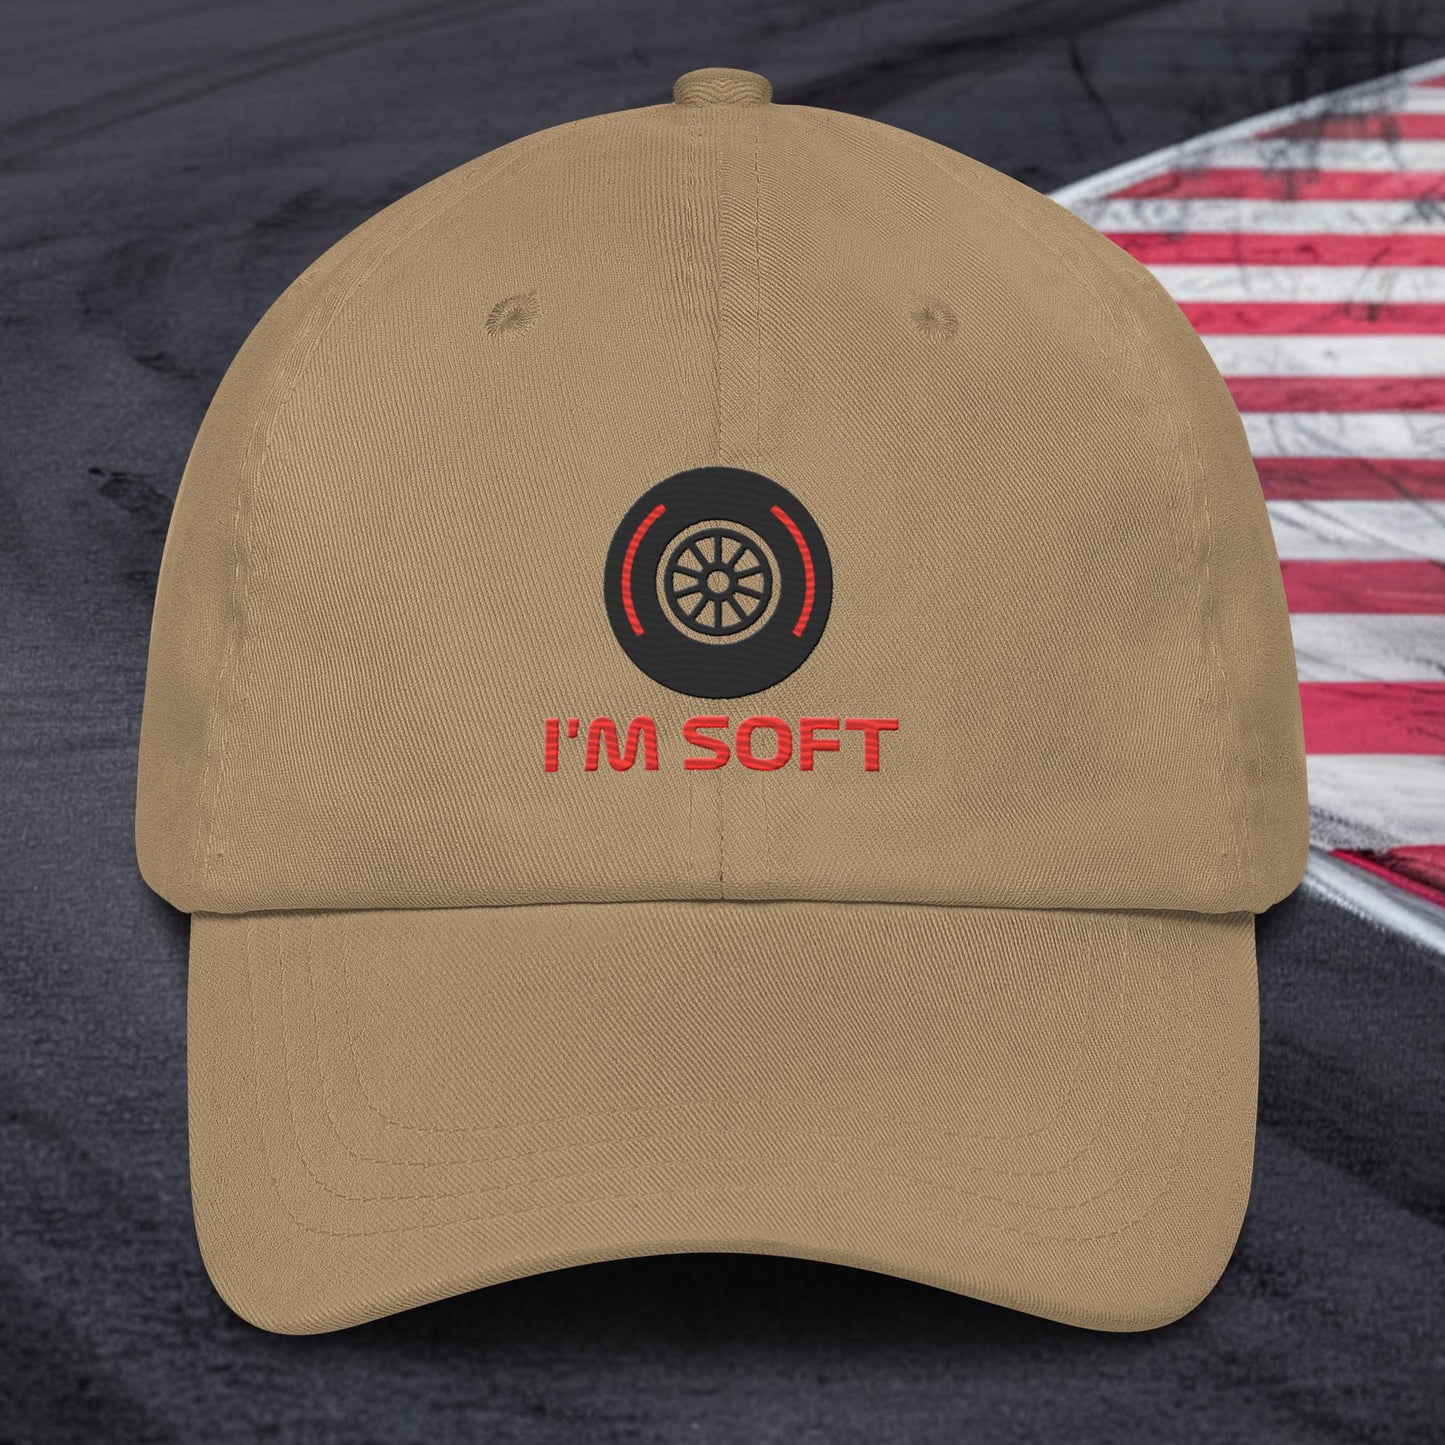 I'm Soft Tyres Funny F1 Dad hat Next Cult Brand